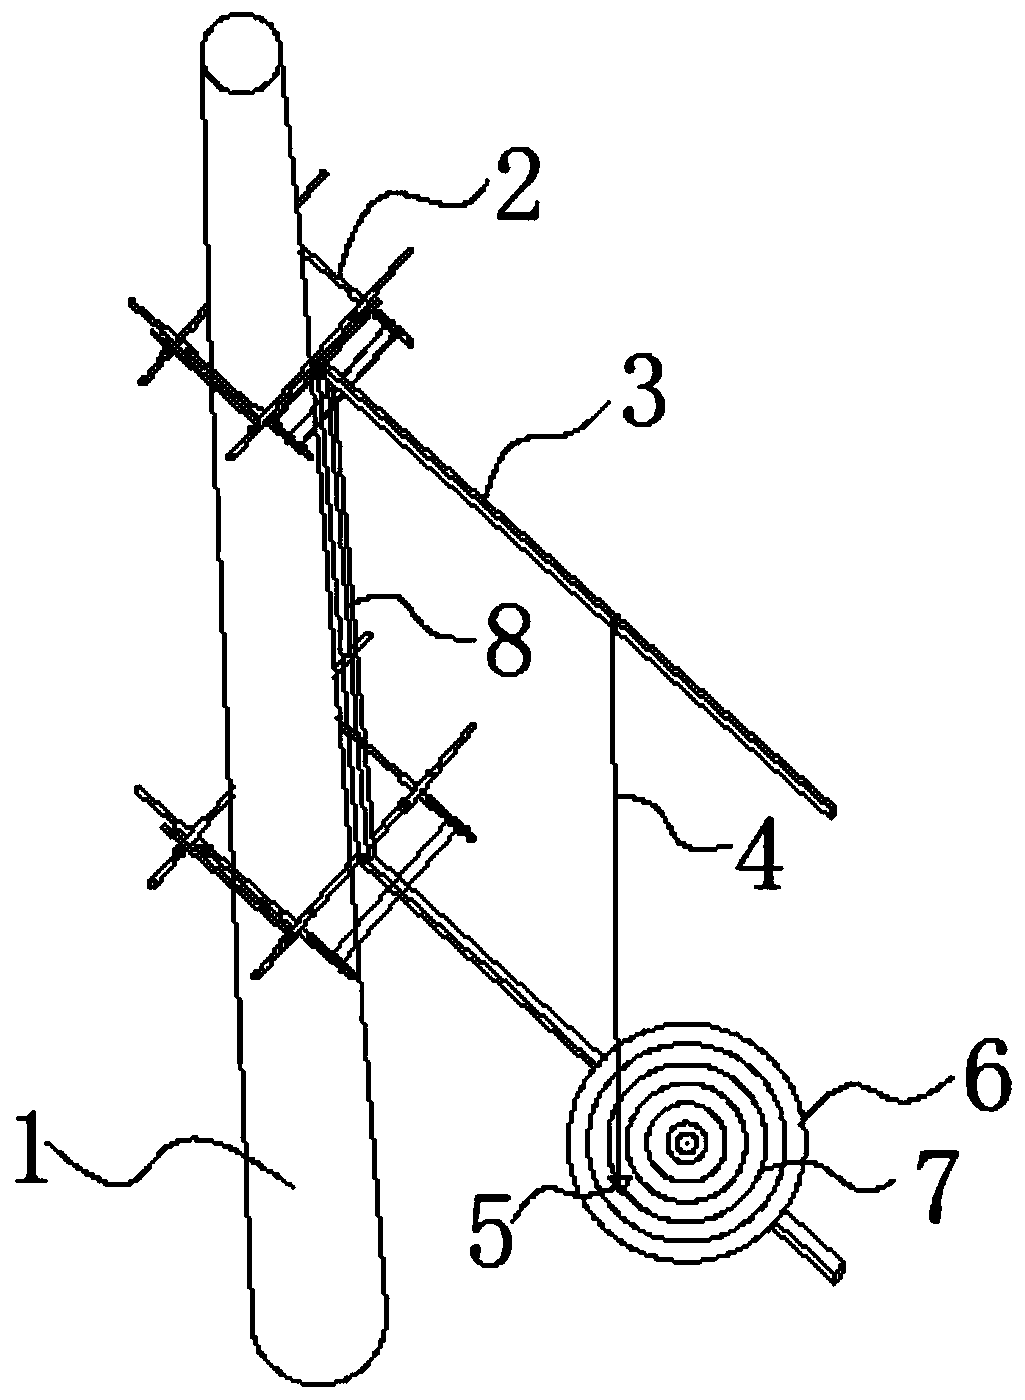 A detection method and detection device for the verticality of a tapered column